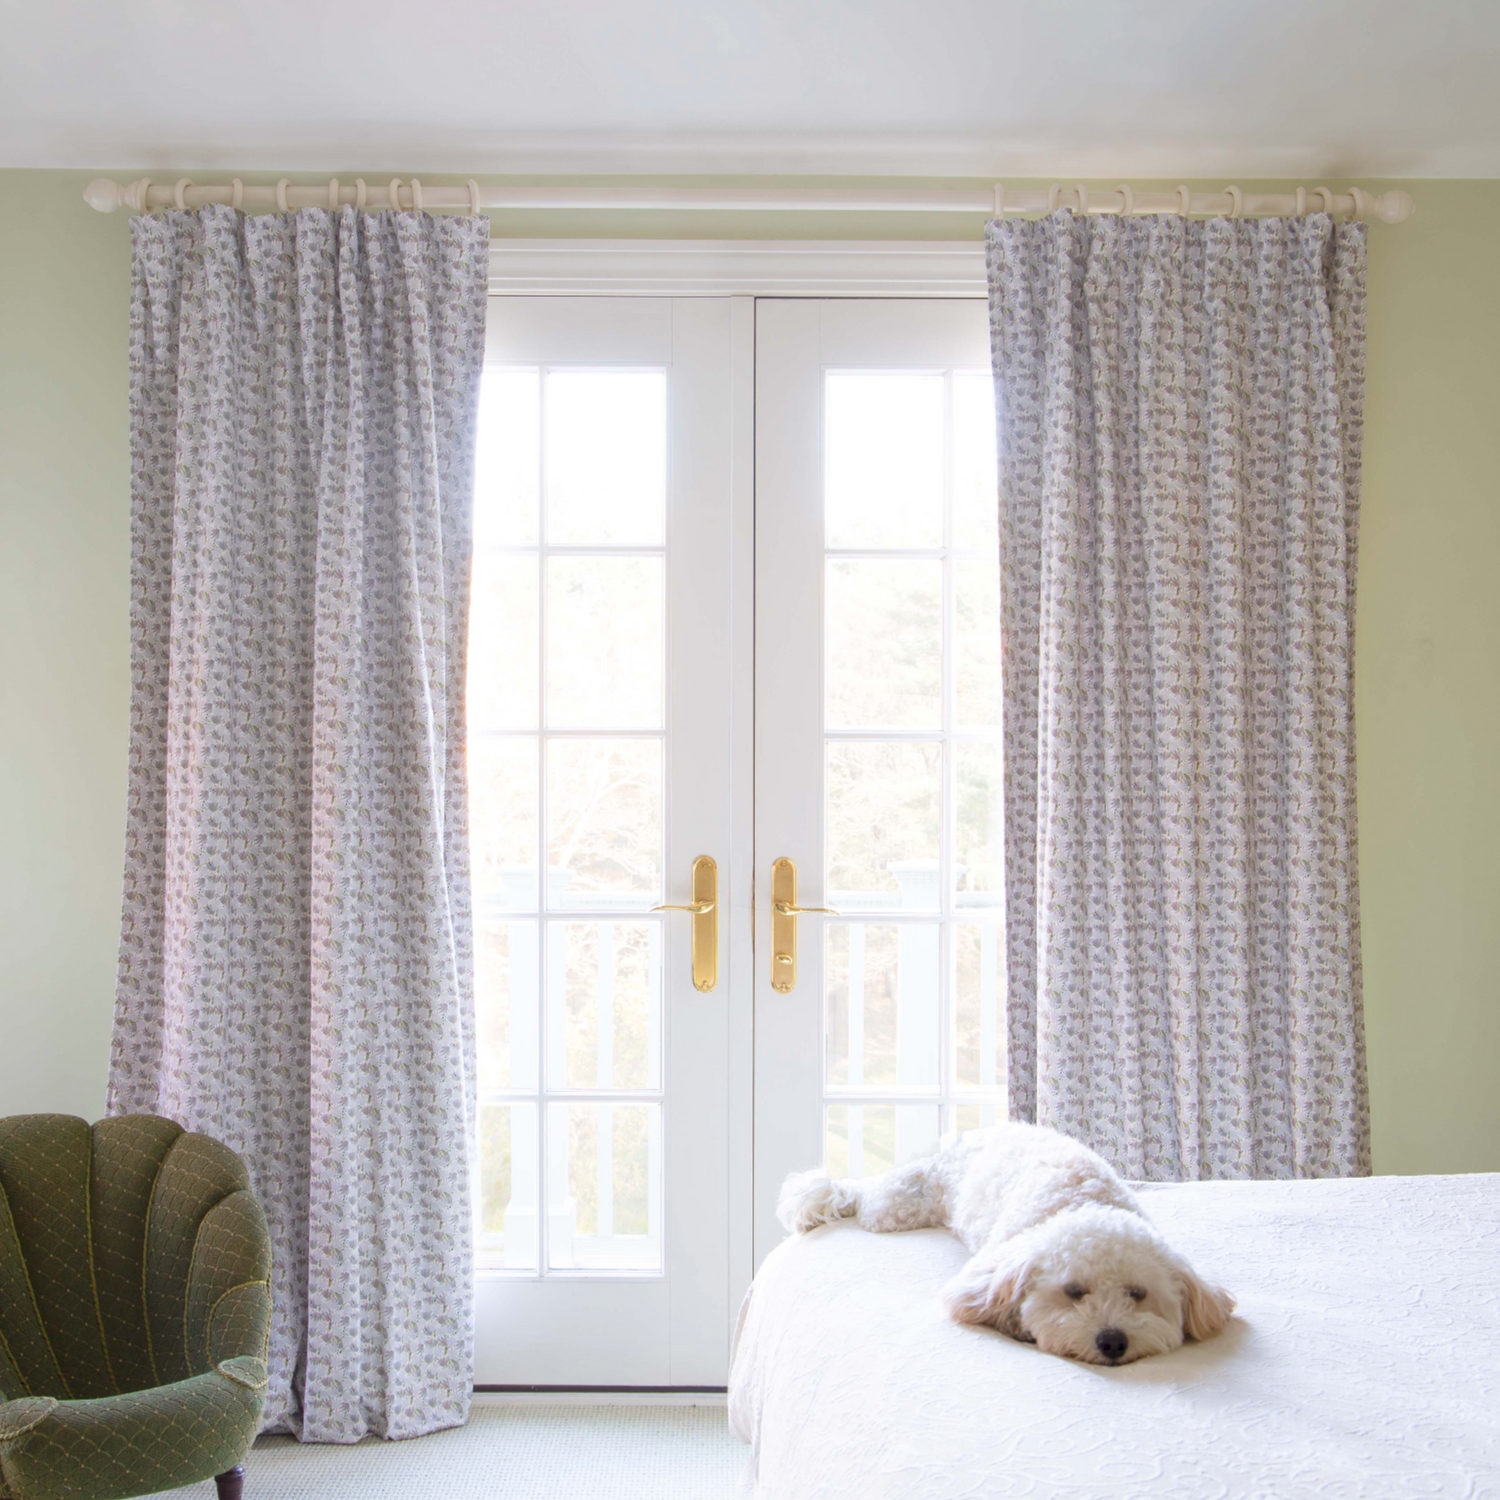 Bedroom styled with Grey Floral Printed Curtains on white rod in front on illuminated window by white dog on white bed next to fern green small sofa chair